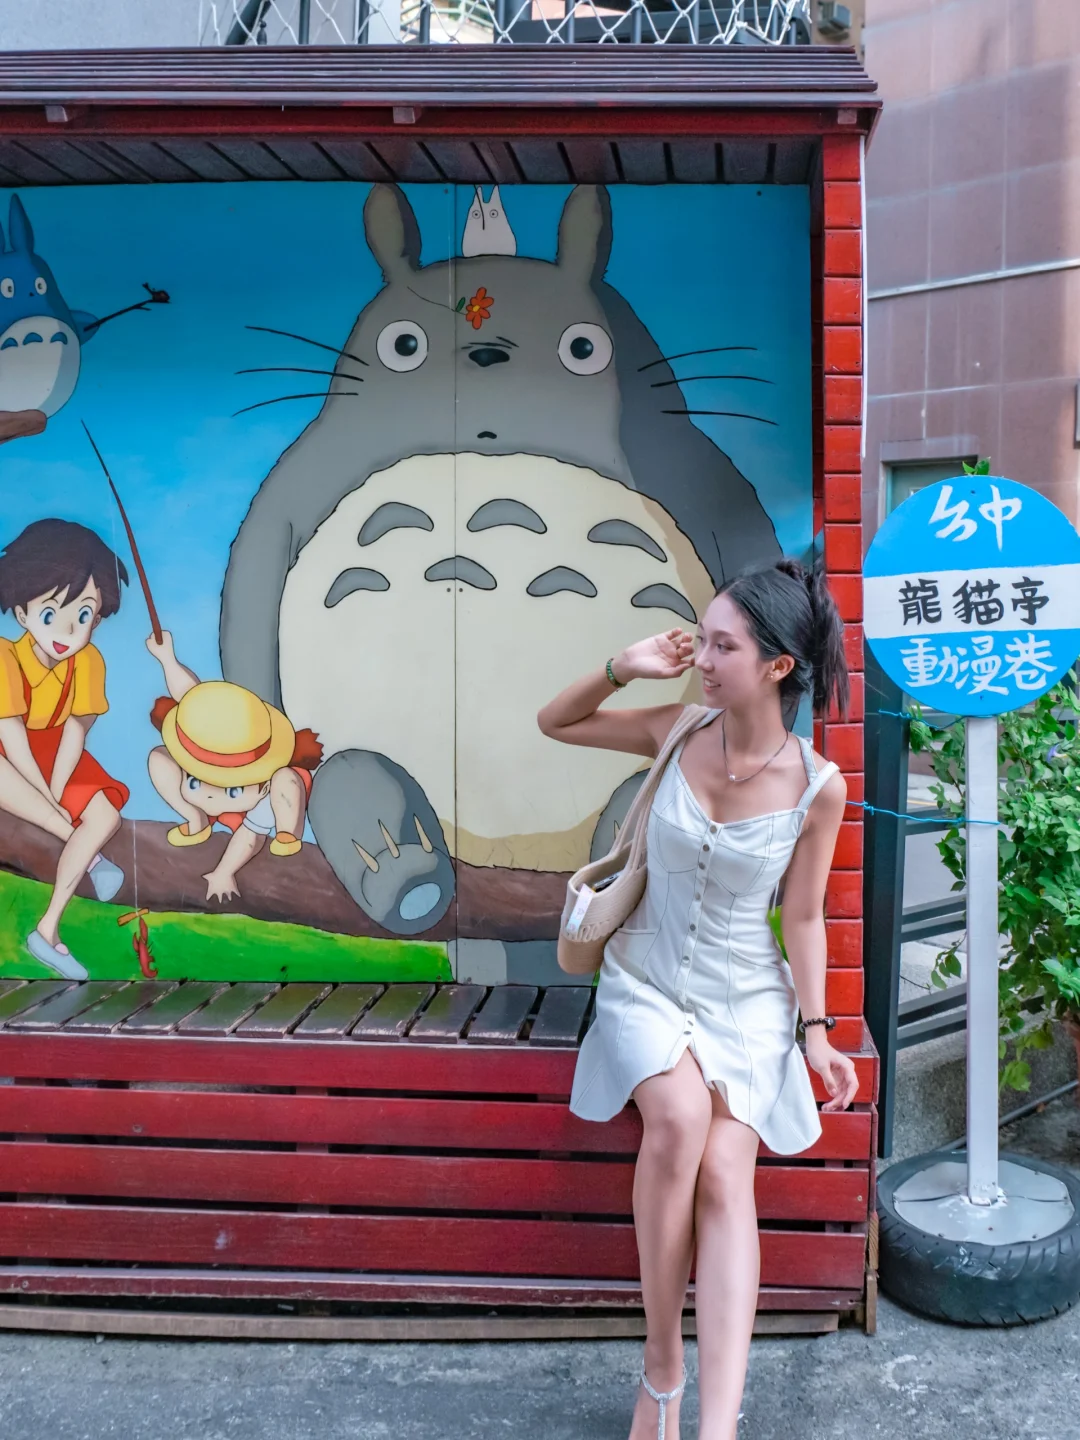 Taiwan-Recommended places to visit in Taichung: Audit Village, Cartoon Painted Lane, Taichung Art Museum